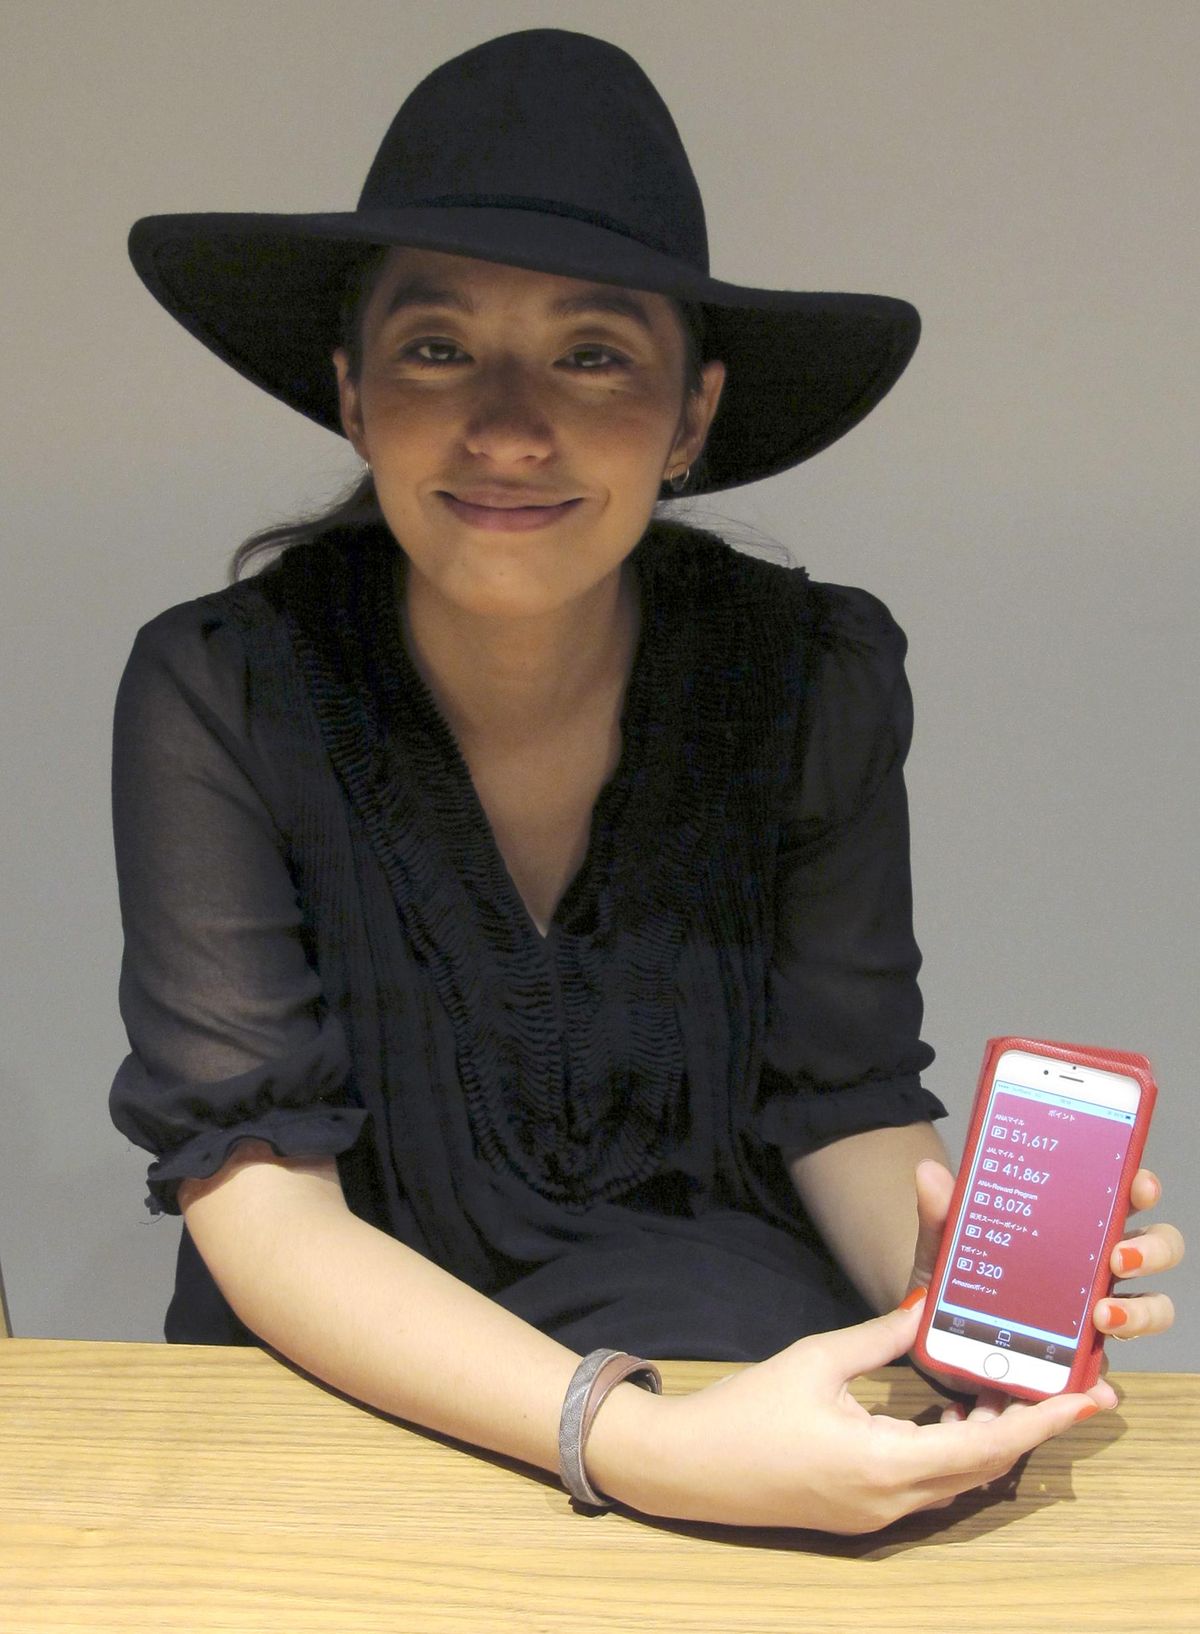 Japanese singer Miho Fukuhara, brand ambassador of Moneytree, shows her discount point on Moneytree App on her mobile phone during an interview, in Tokyo on Oct. 19. Moneytree, with a staff of 18, has developed iPhone and iPad applications that allows people to track personal finances, attracting 850,000 downloads over three years. (Yuri Kageyama / Associated Press)